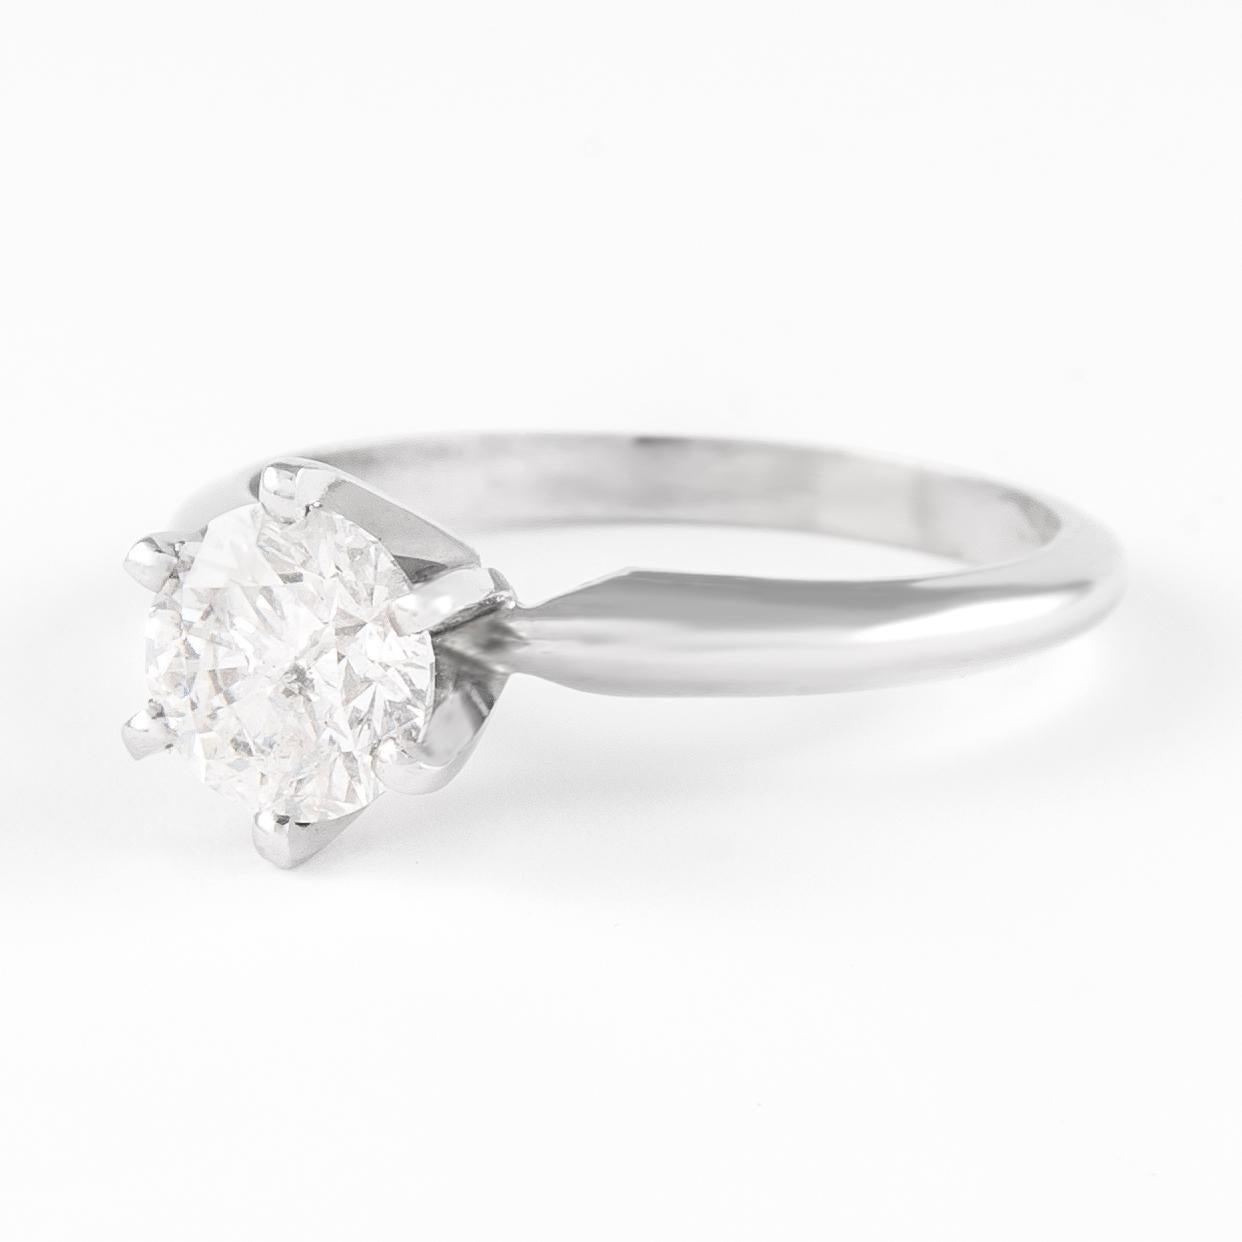 Classic solitaire diamond engagement ring, 